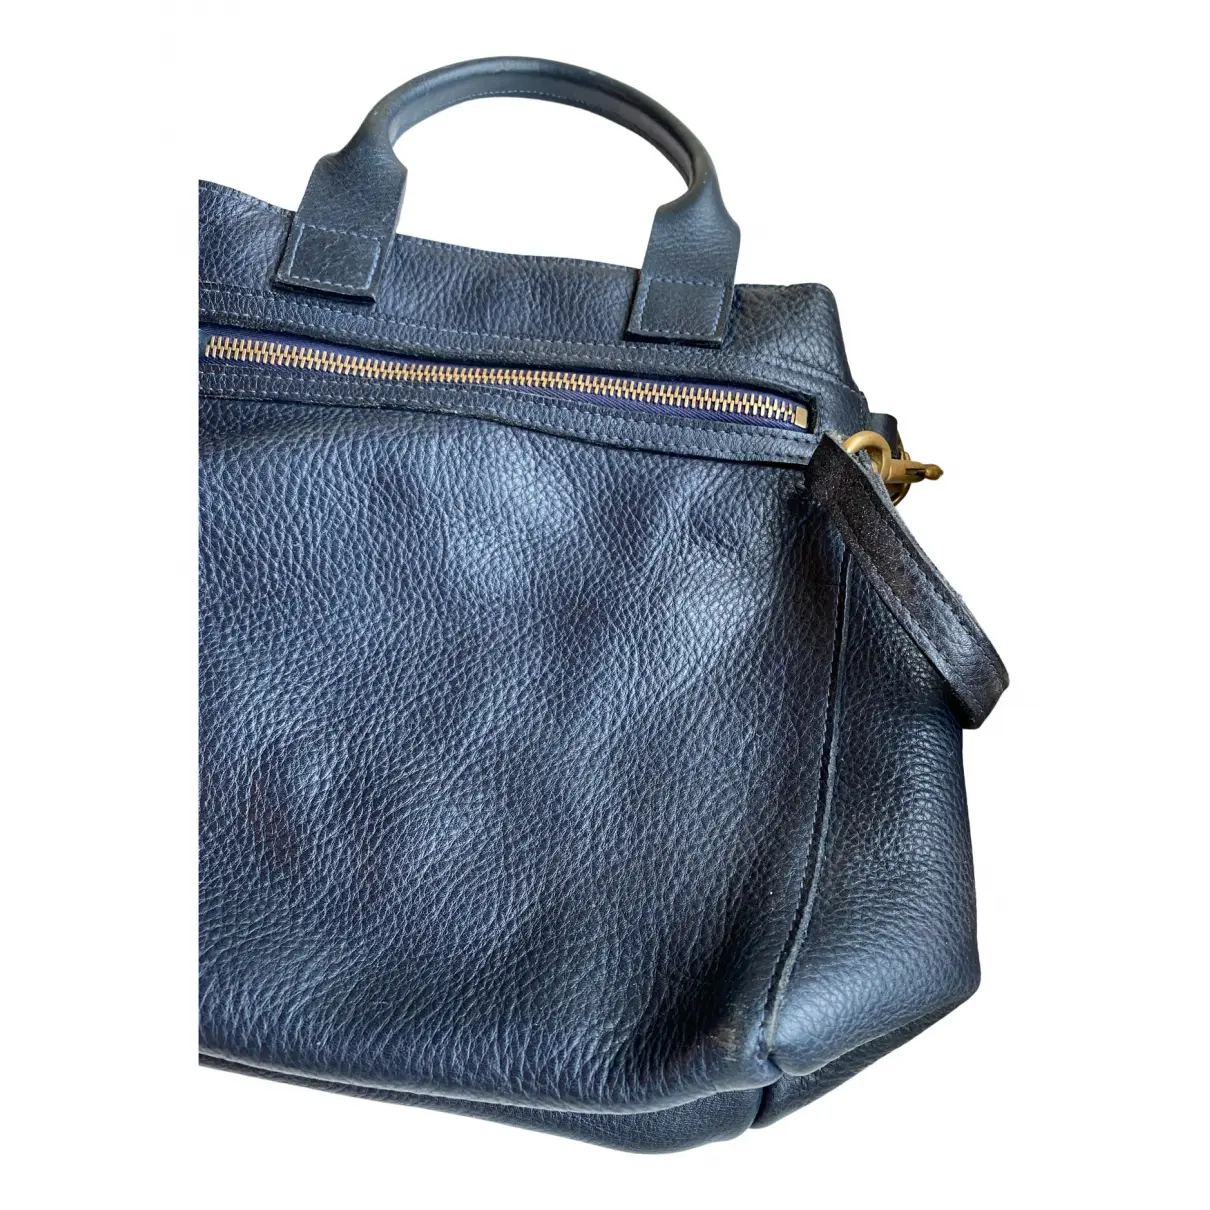 Buy The Jacksons Leather bag online